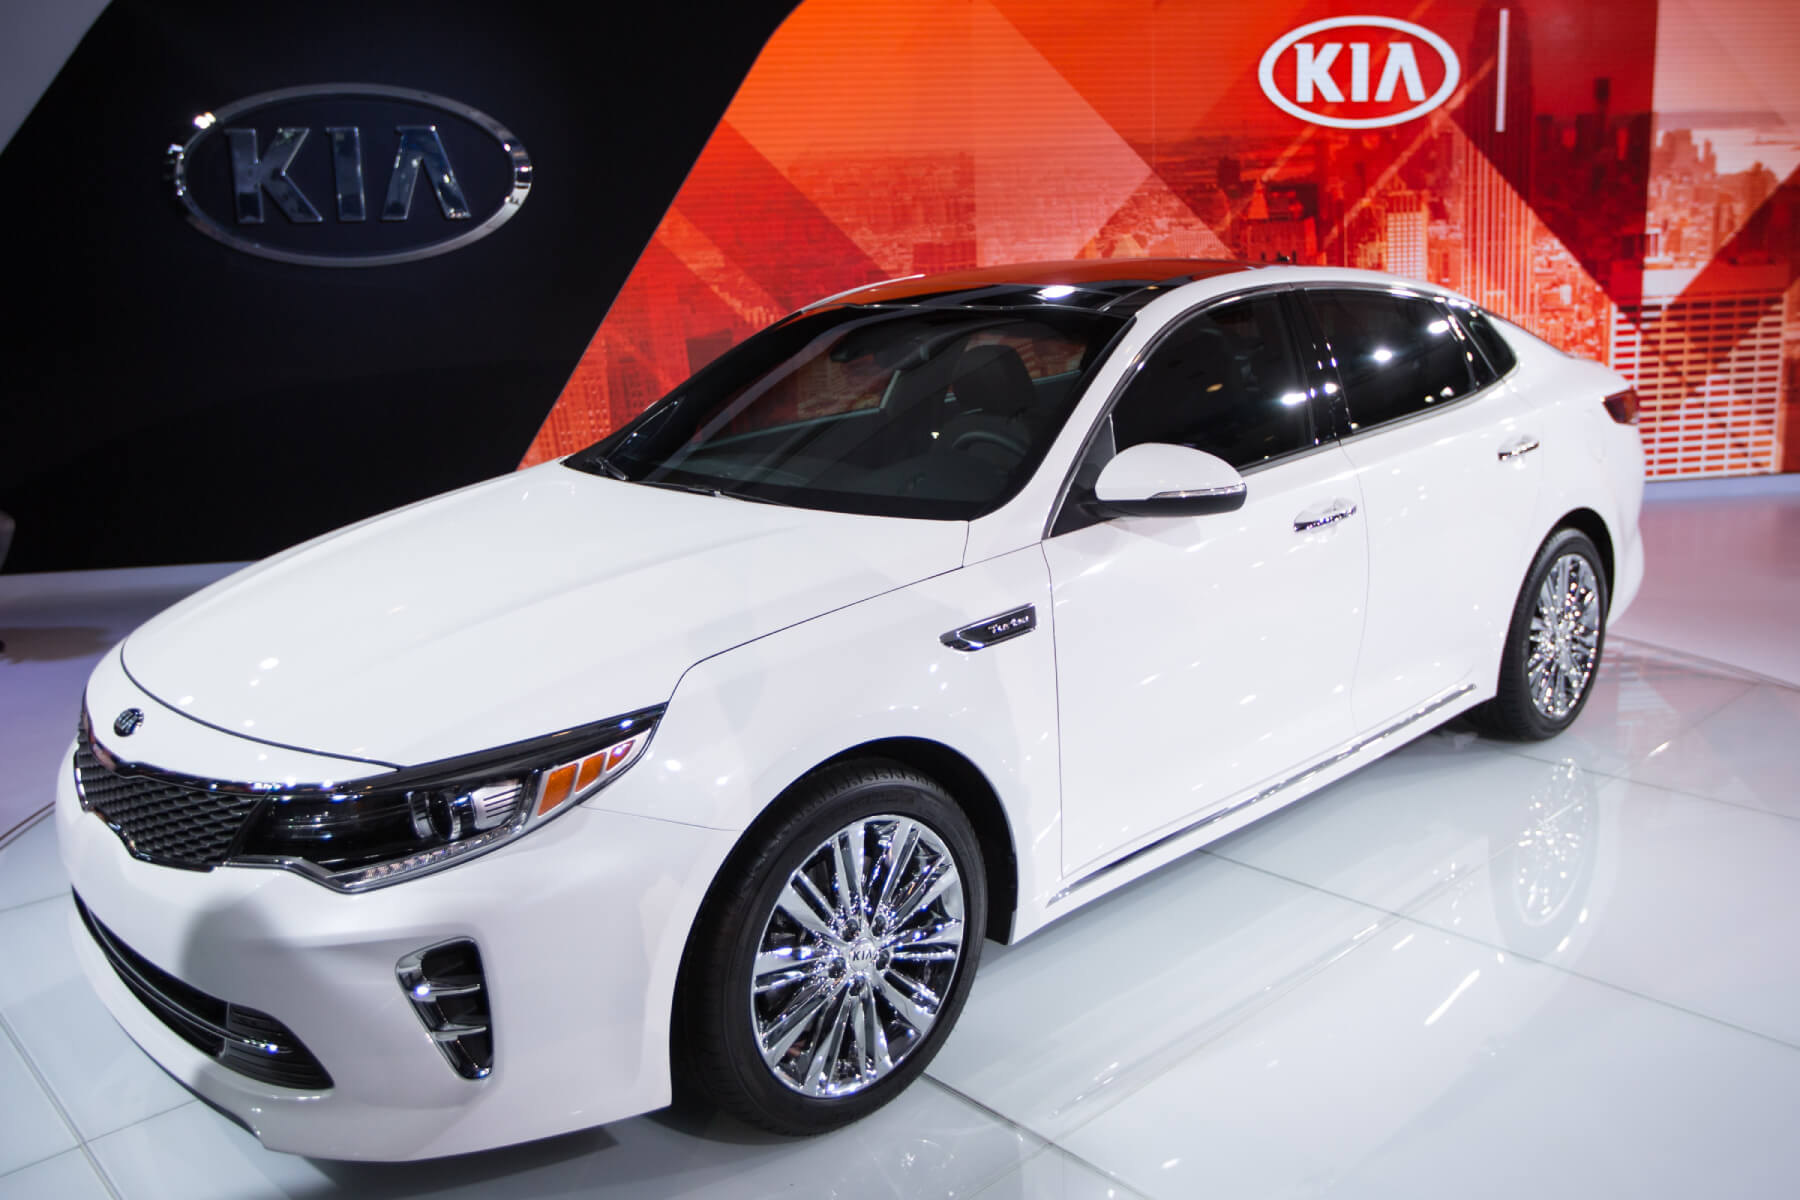 A white Kia Optima sits on the floor of an auto show. The Optima is among various models at risk for theft after a viral TikTok trend.